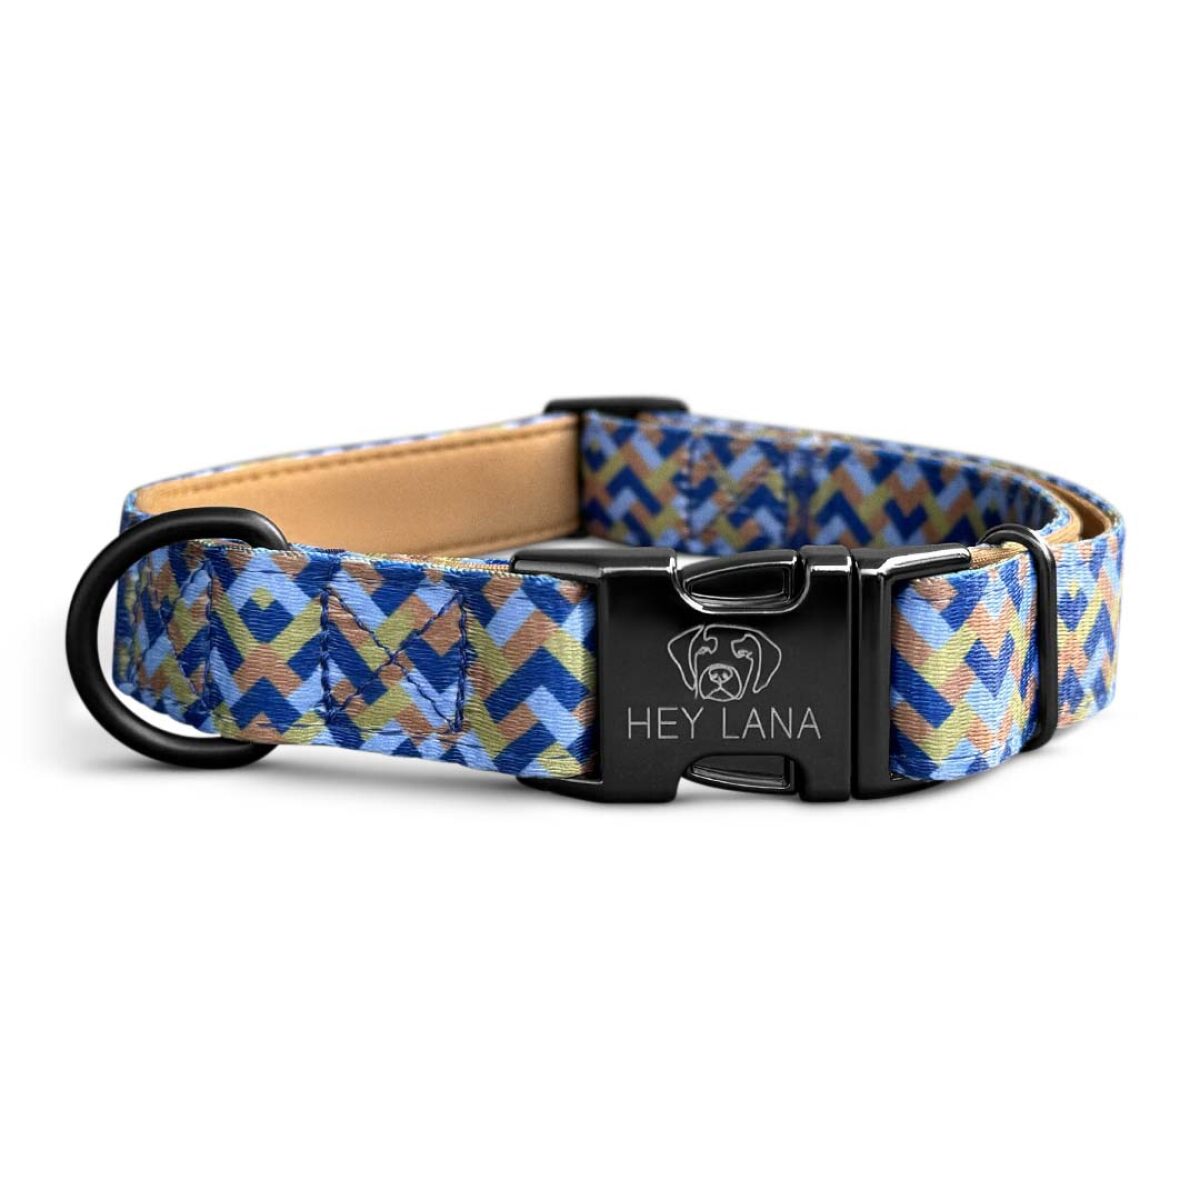 Kunterbunt dog collar in moccha/blue at the front